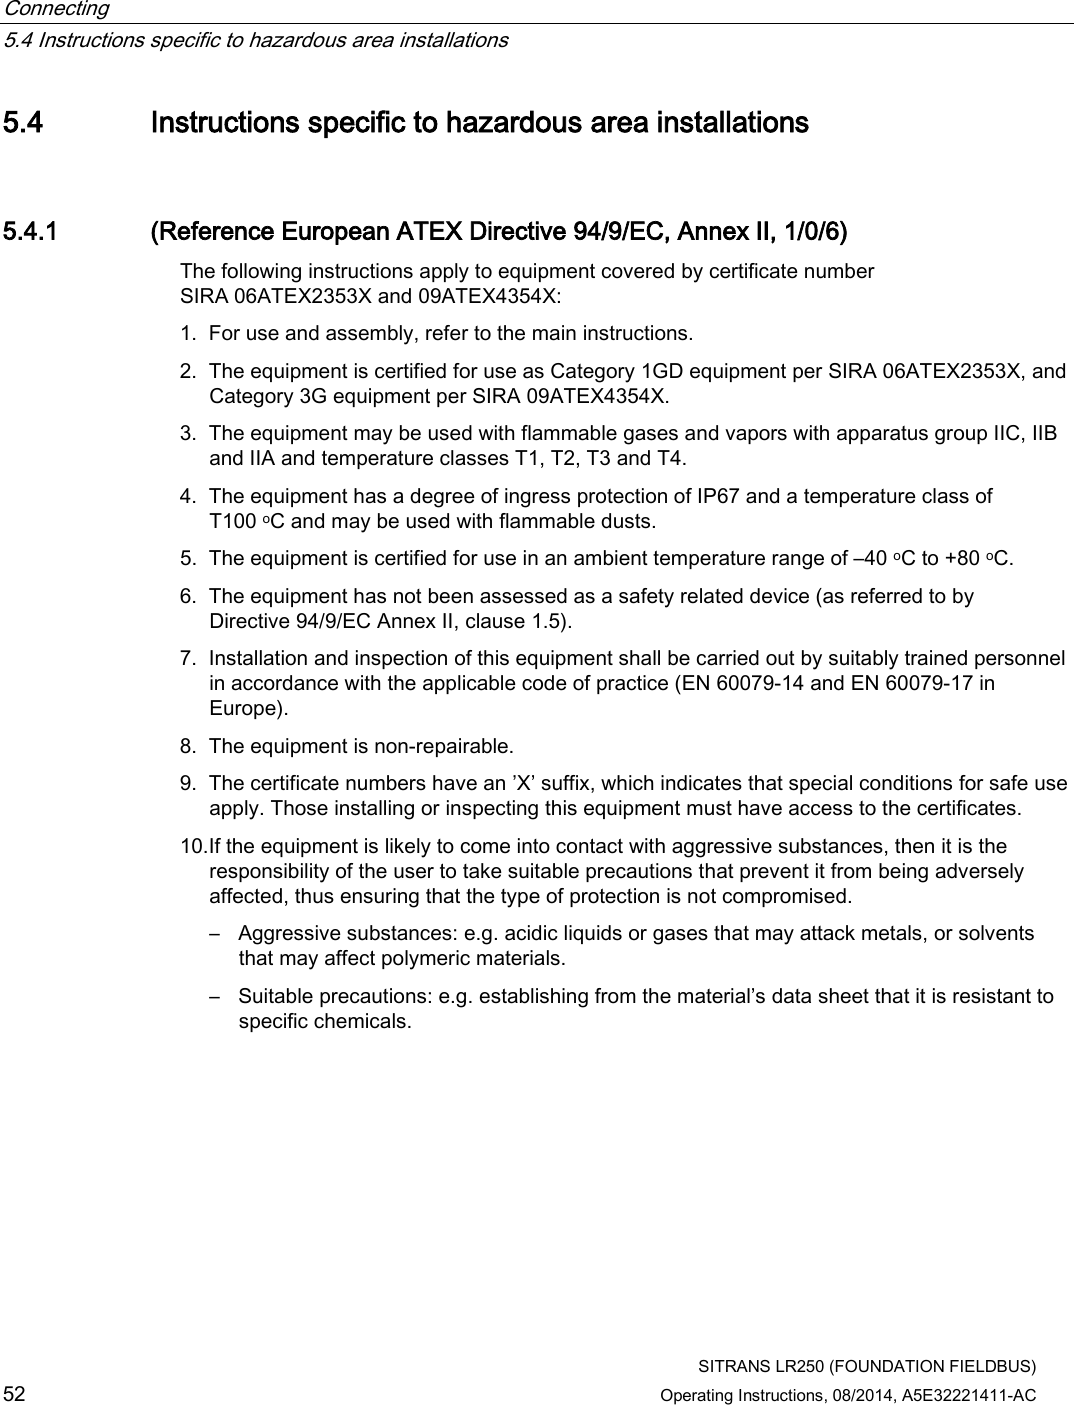 Connecting   5.4 Instructions specific to hazardous area installations  SITRANS LR250 (FOUNDATION FIELDBUS) 52 Operating Instructions, 08/2014, A5E32221411-AC 5.4 Instructions specific to hazardous area installations 5.4.1 (Reference European ATEX Directive 94/9/EC, Annex II, 1/0/6) The following instructions apply to equipment covered by certificate number SIRA 06ATEX2353X and 09ATEX4354X: 1. For use and assembly, refer to the main instructions. 2. The equipment is certified for use as Category 1GD equipment per SIRA 06ATEX2353X, and Category 3G equipment per SIRA 09ATEX4354X. 3. The equipment may be used with flammable gases and vapors with apparatus group IIC, IIB and IIA and temperature classes T1, T2, T3 and T4. 4. The equipment has a degree of ingress protection of IP67 and a temperature class of T100 oC and may be used with flammable dusts. 5. The equipment is certified for use in an ambient temperature range of –40 oC to +80 oC. 6. The equipment has not been assessed as a safety related device (as referred to by Directive 94/9/EC Annex II, clause 1.5). 7. Installation and inspection of this equipment shall be carried out by suitably trained personnel in accordance with the applicable code of practice (EN 60079-14 and EN 60079-17 in Europe). 8. The equipment is non-repairable. 9. The certificate numbers have an ’X’ suffix, which indicates that special conditions for safe use apply. Those installing or inspecting this equipment must have access to the certificates. 10.If the equipment is likely to come into contact with aggressive substances, then it is the responsibility of the user to take suitable precautions that prevent it from being adversely affected, thus ensuring that the type of protection is not compromised. – Aggressive substances: e.g. acidic liquids or gases that may attack metals, or solvents that may affect polymeric materials. – Suitable precautions: e.g. establishing from the material’s data sheet that it is resistant to specific chemicals. 